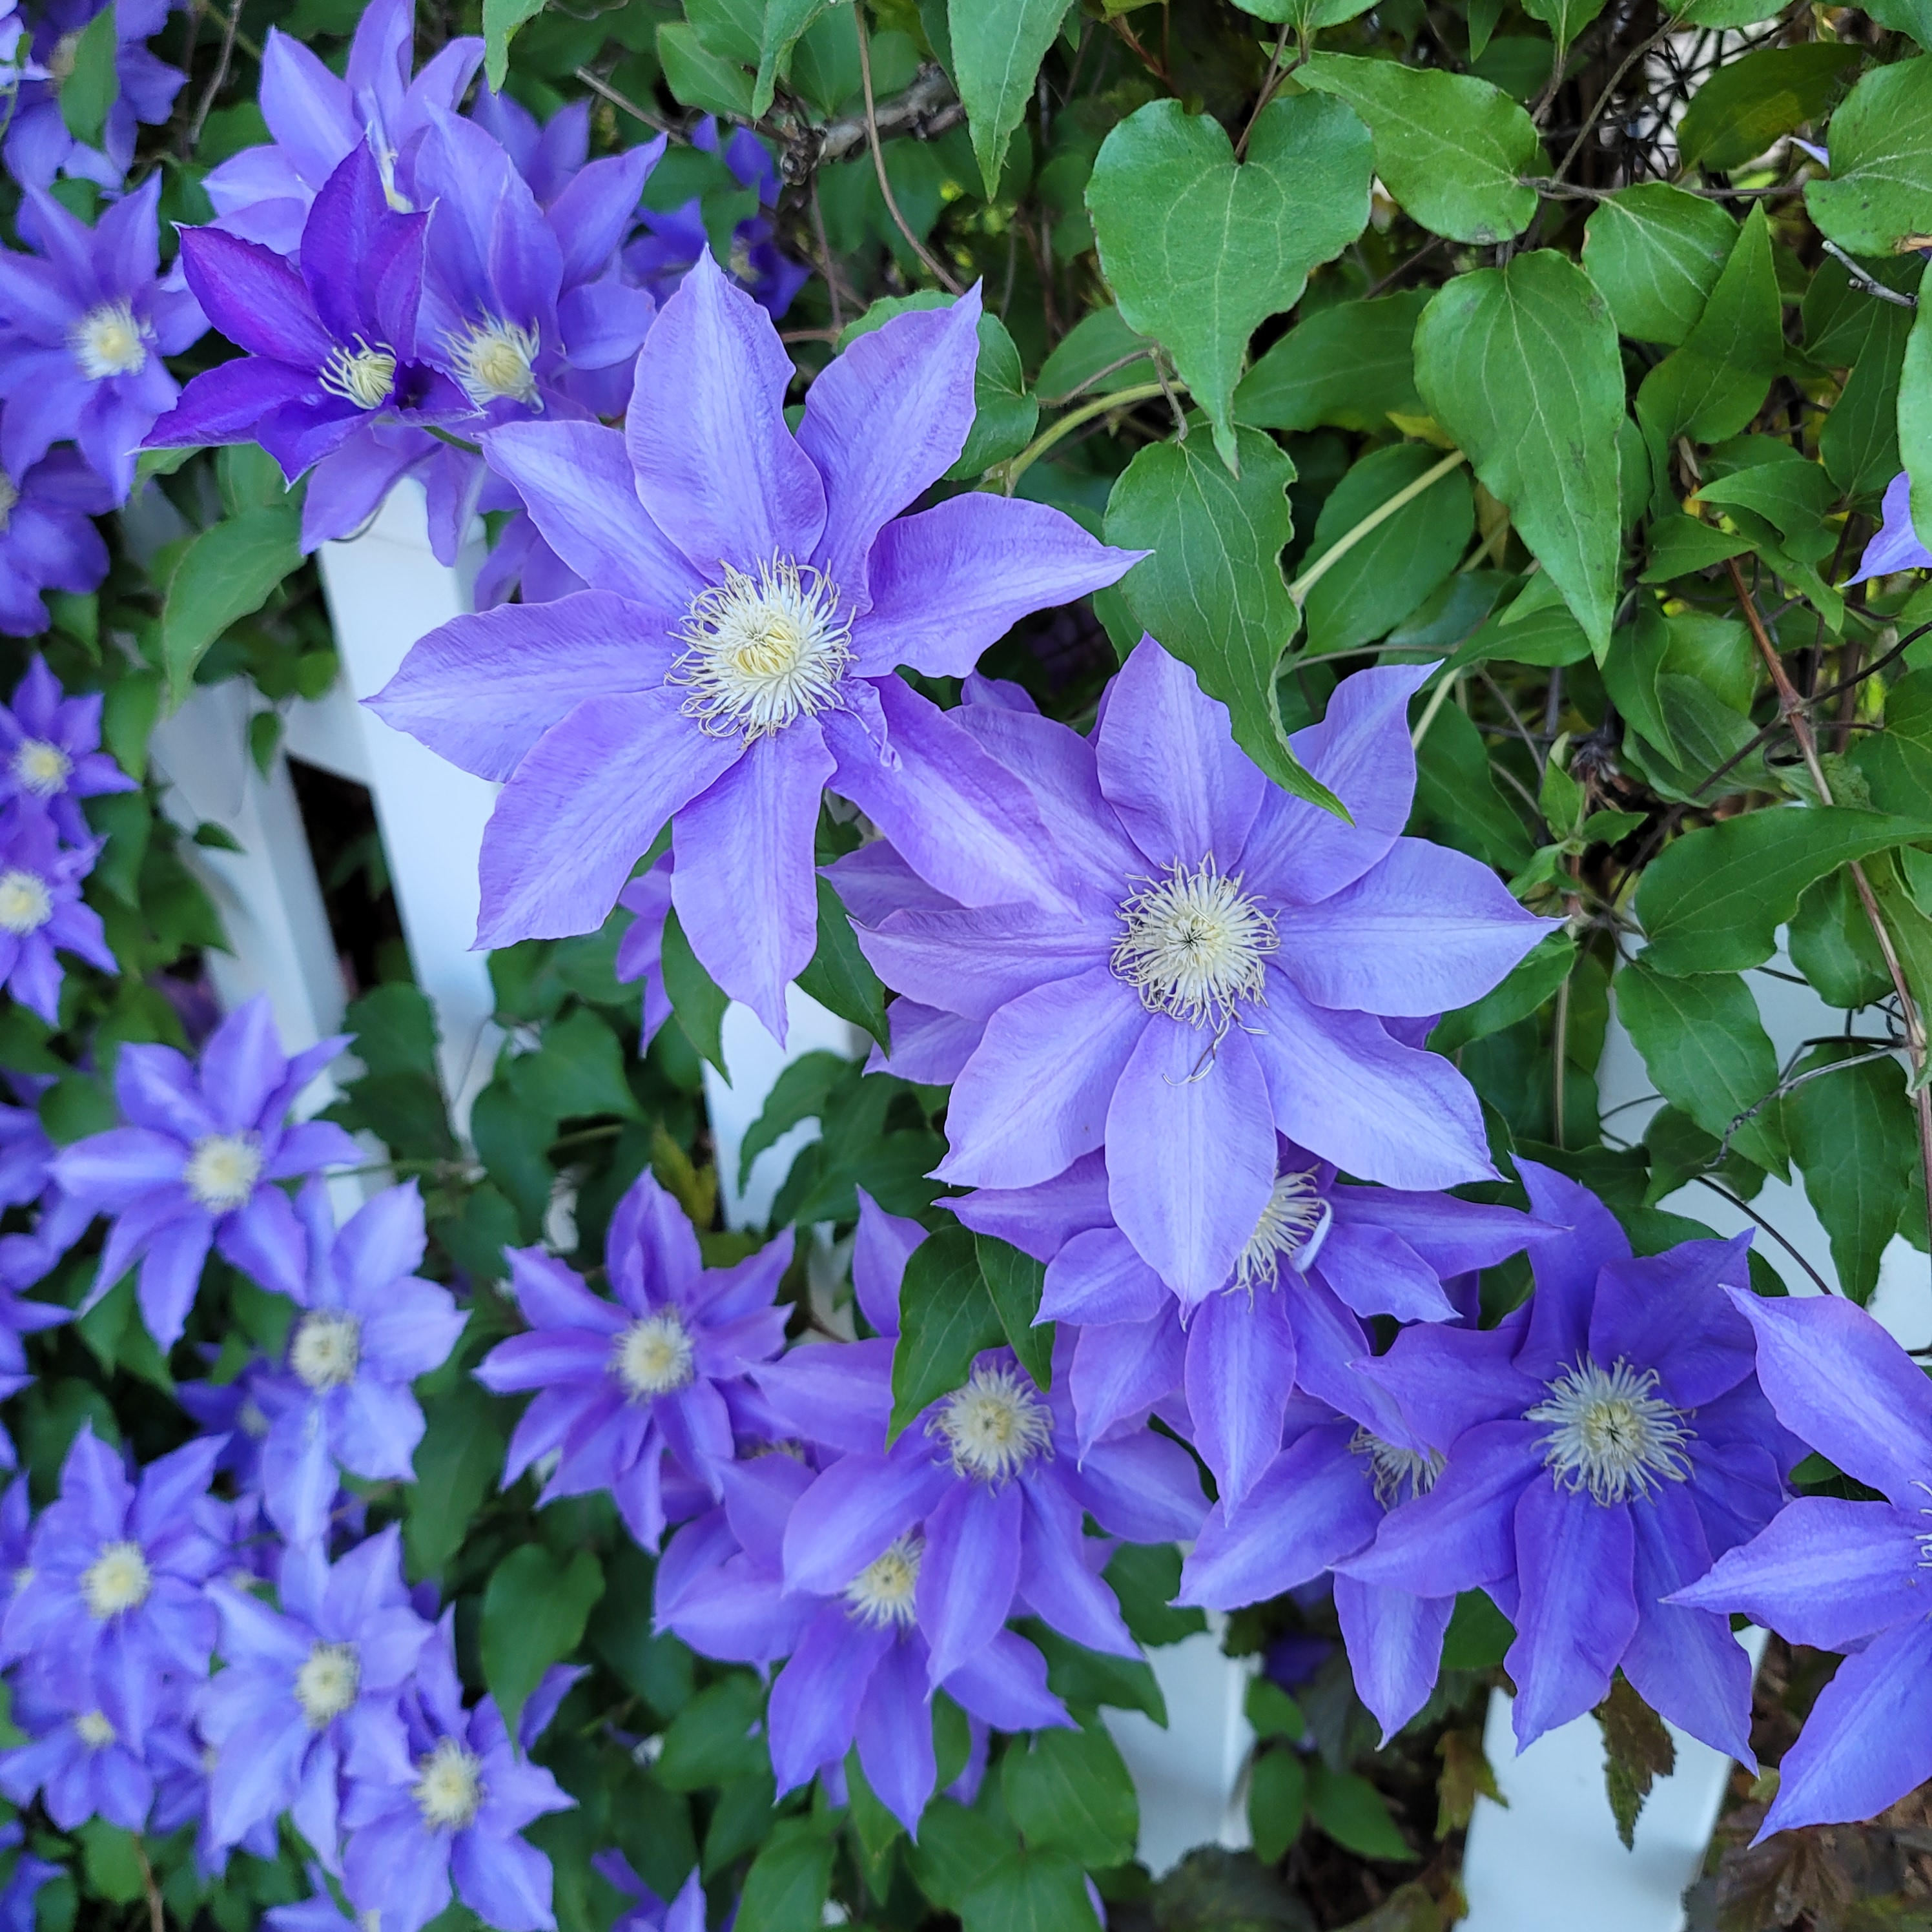 Here is a picture of some purple clematises blooming.